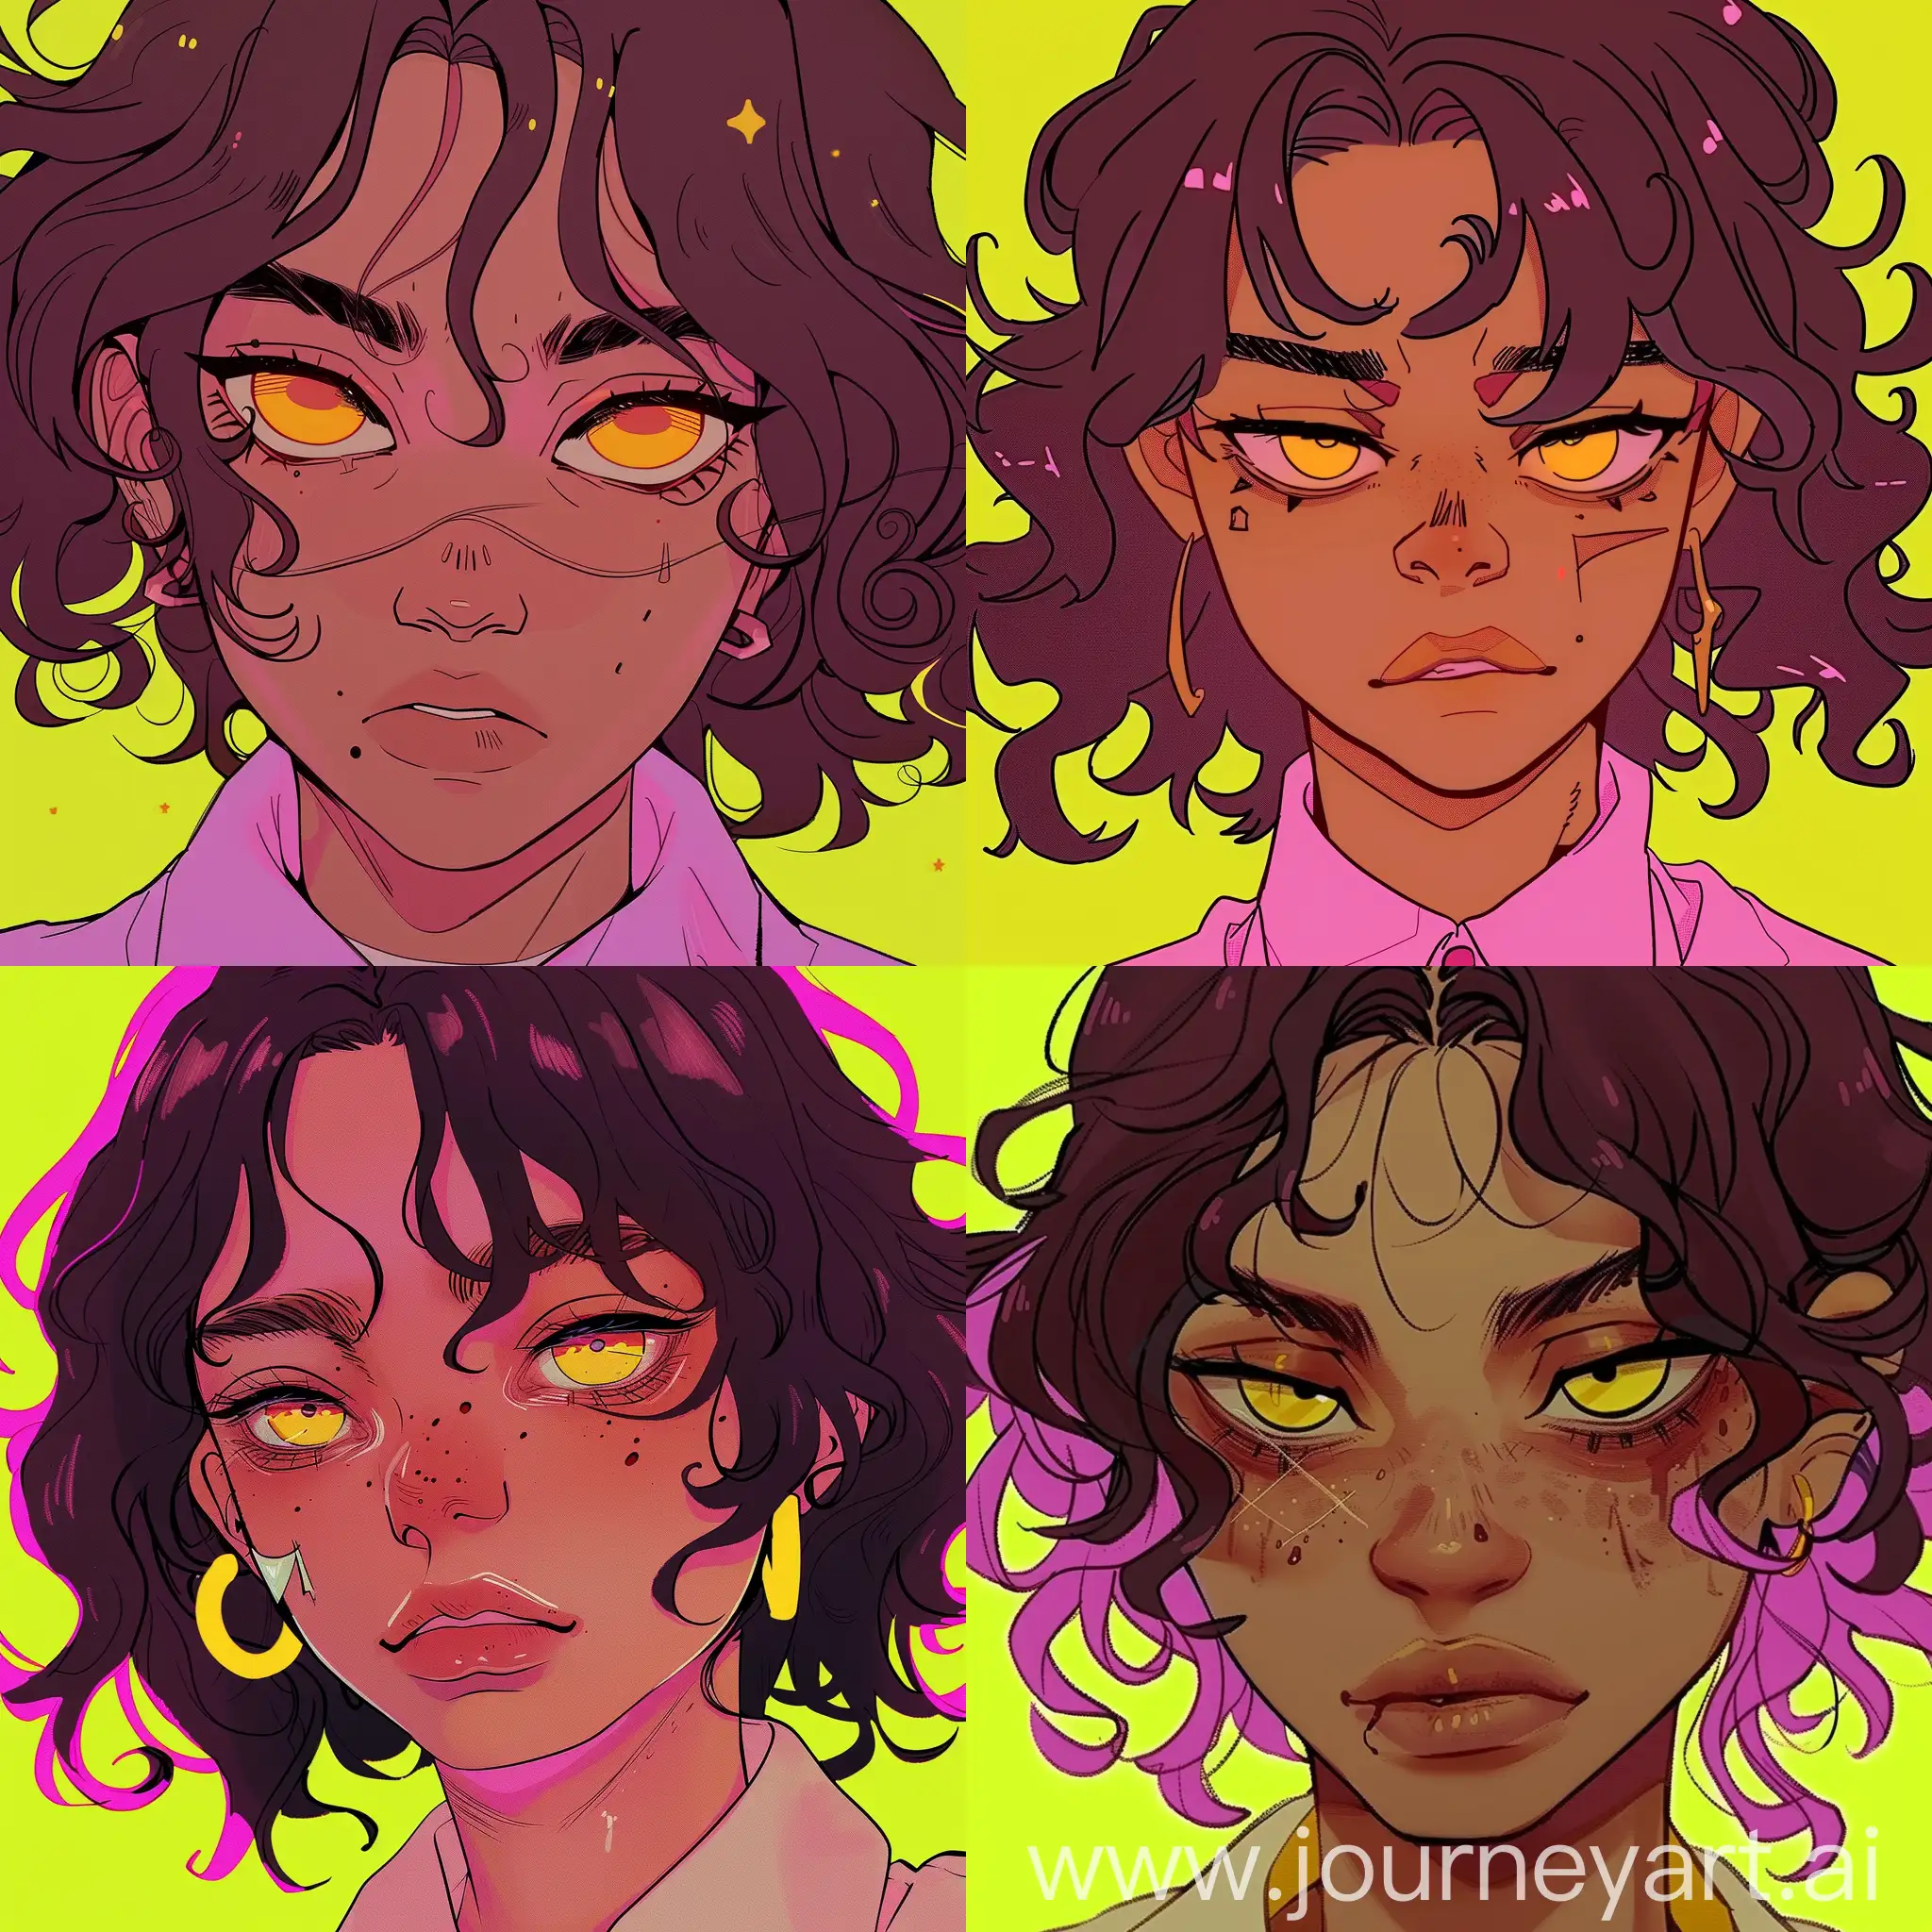 CurlyHaired-Girl-with-Scar-in-Anime-Style-on-Yellow-Background